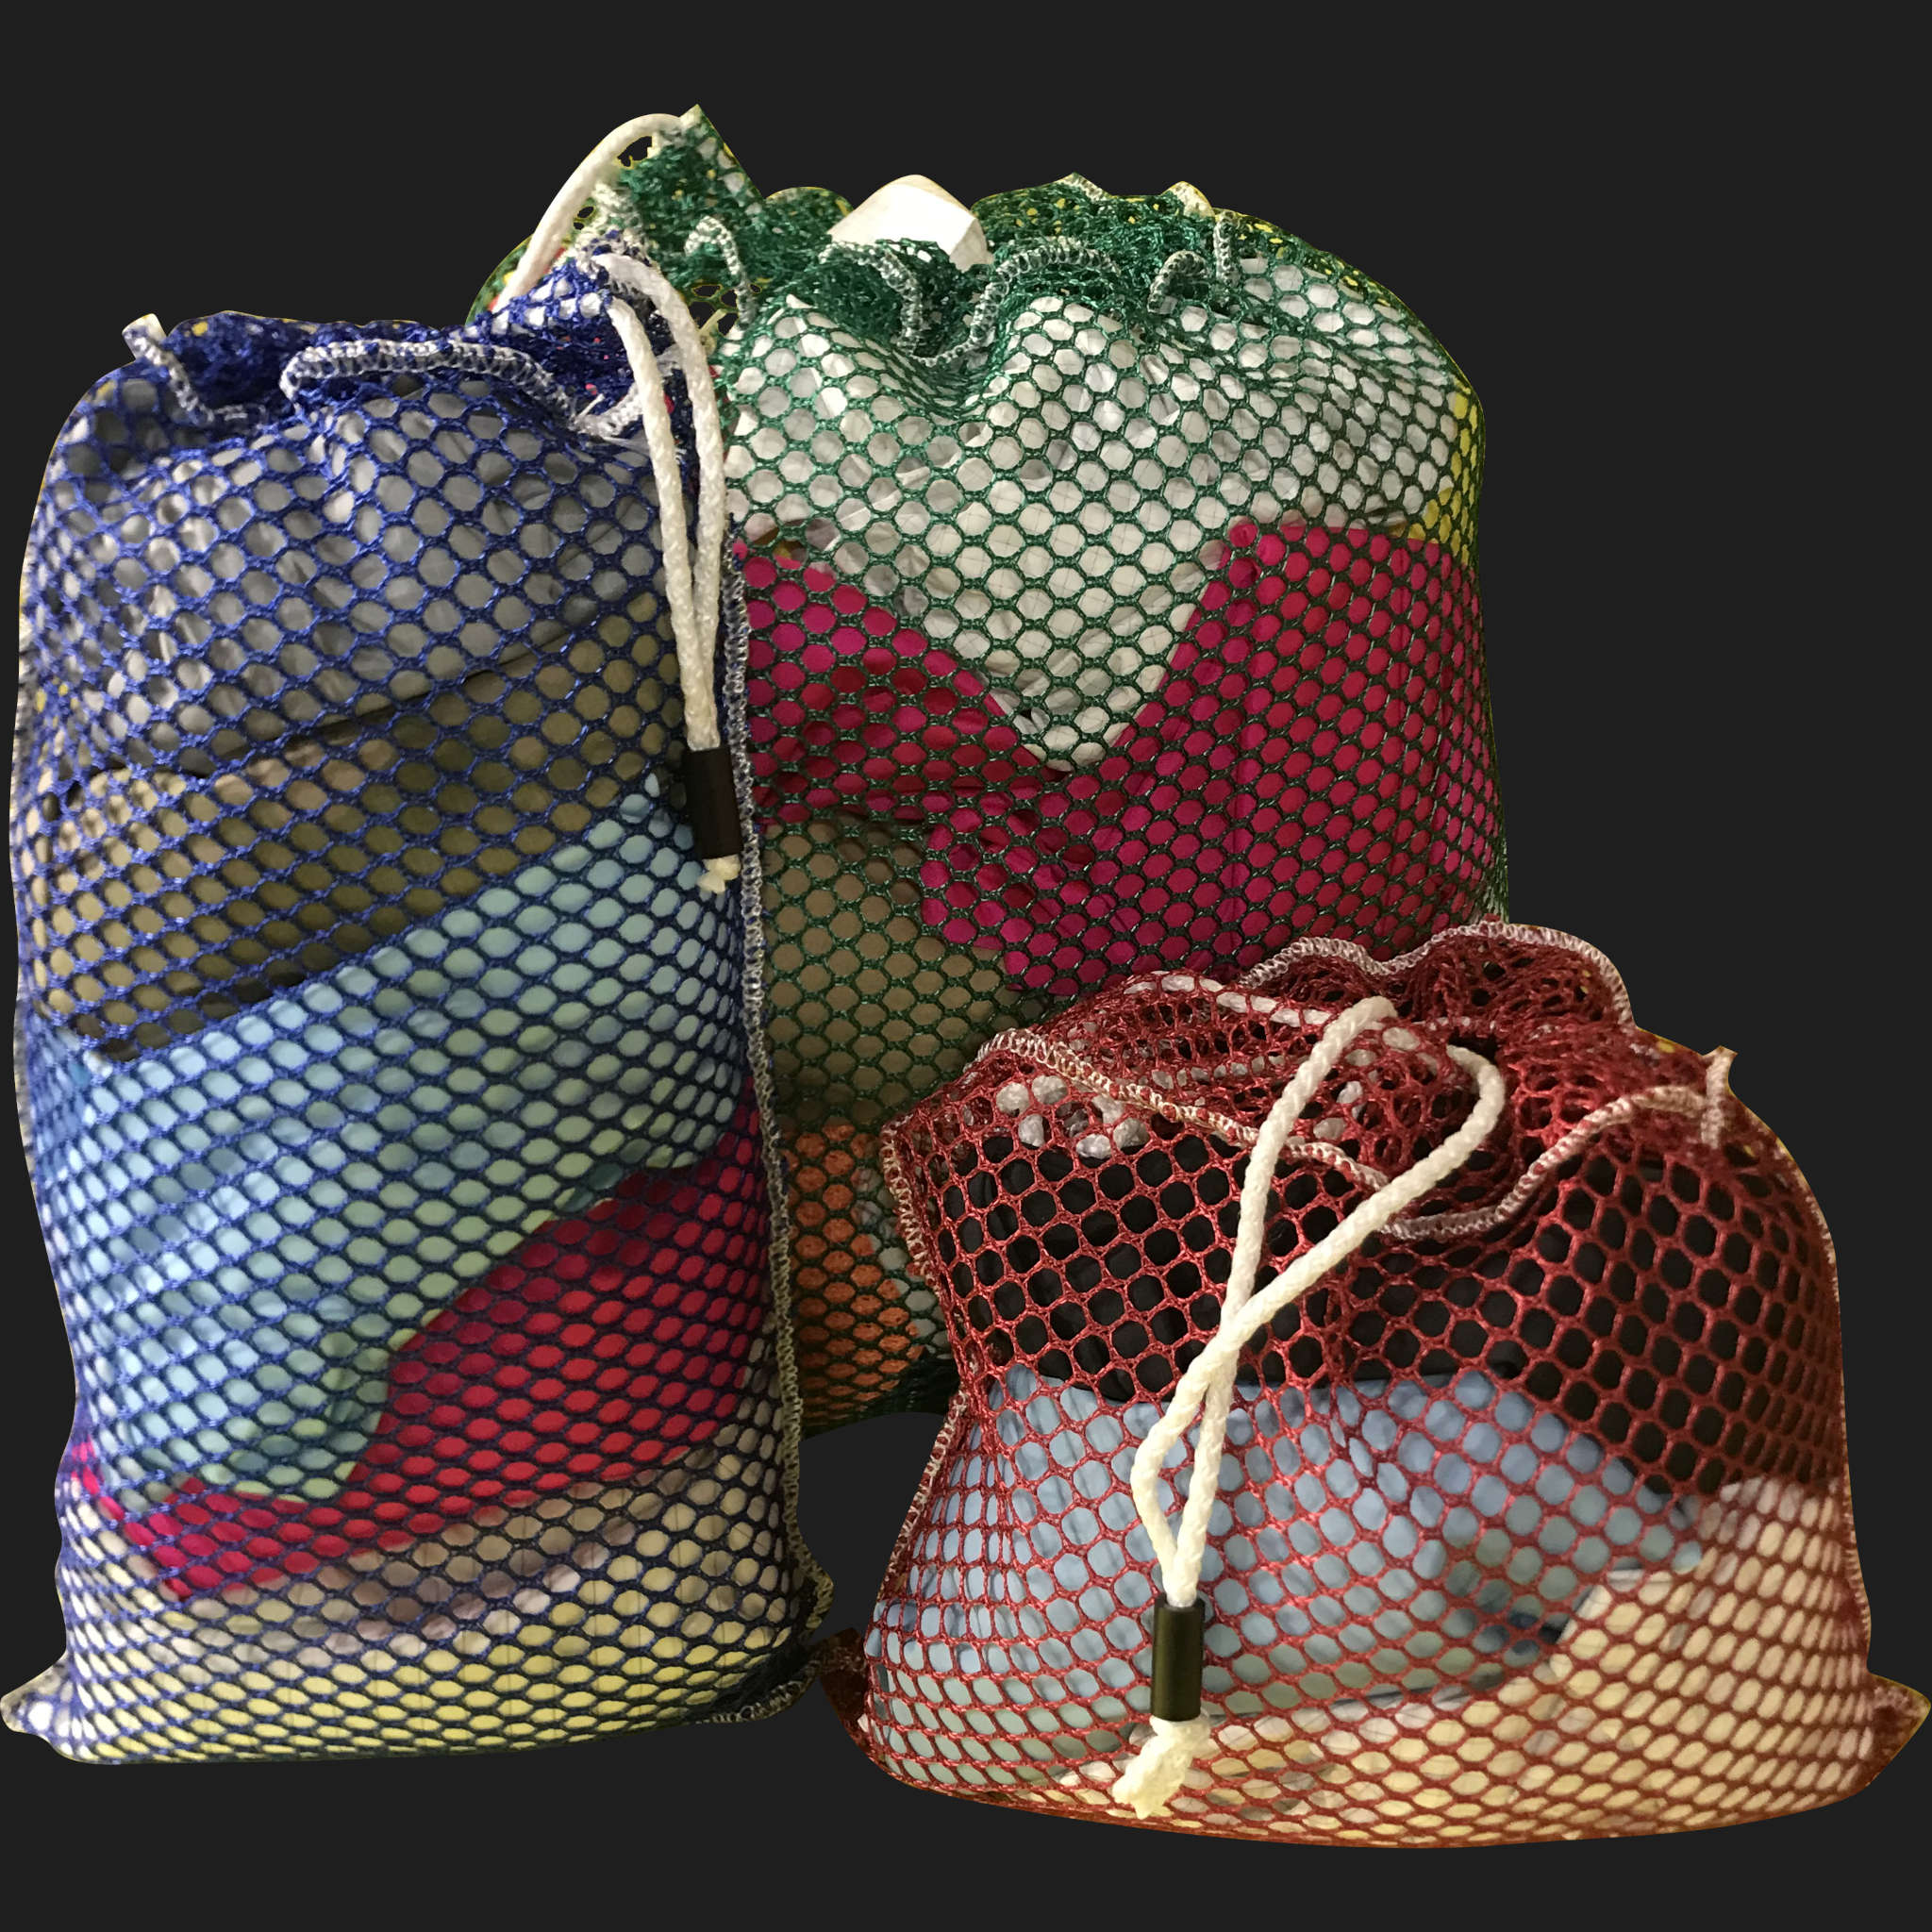 24" x 32" Customized Mesh-Net-Laundry Bags Heavy Duty with Cord and barrellock closure